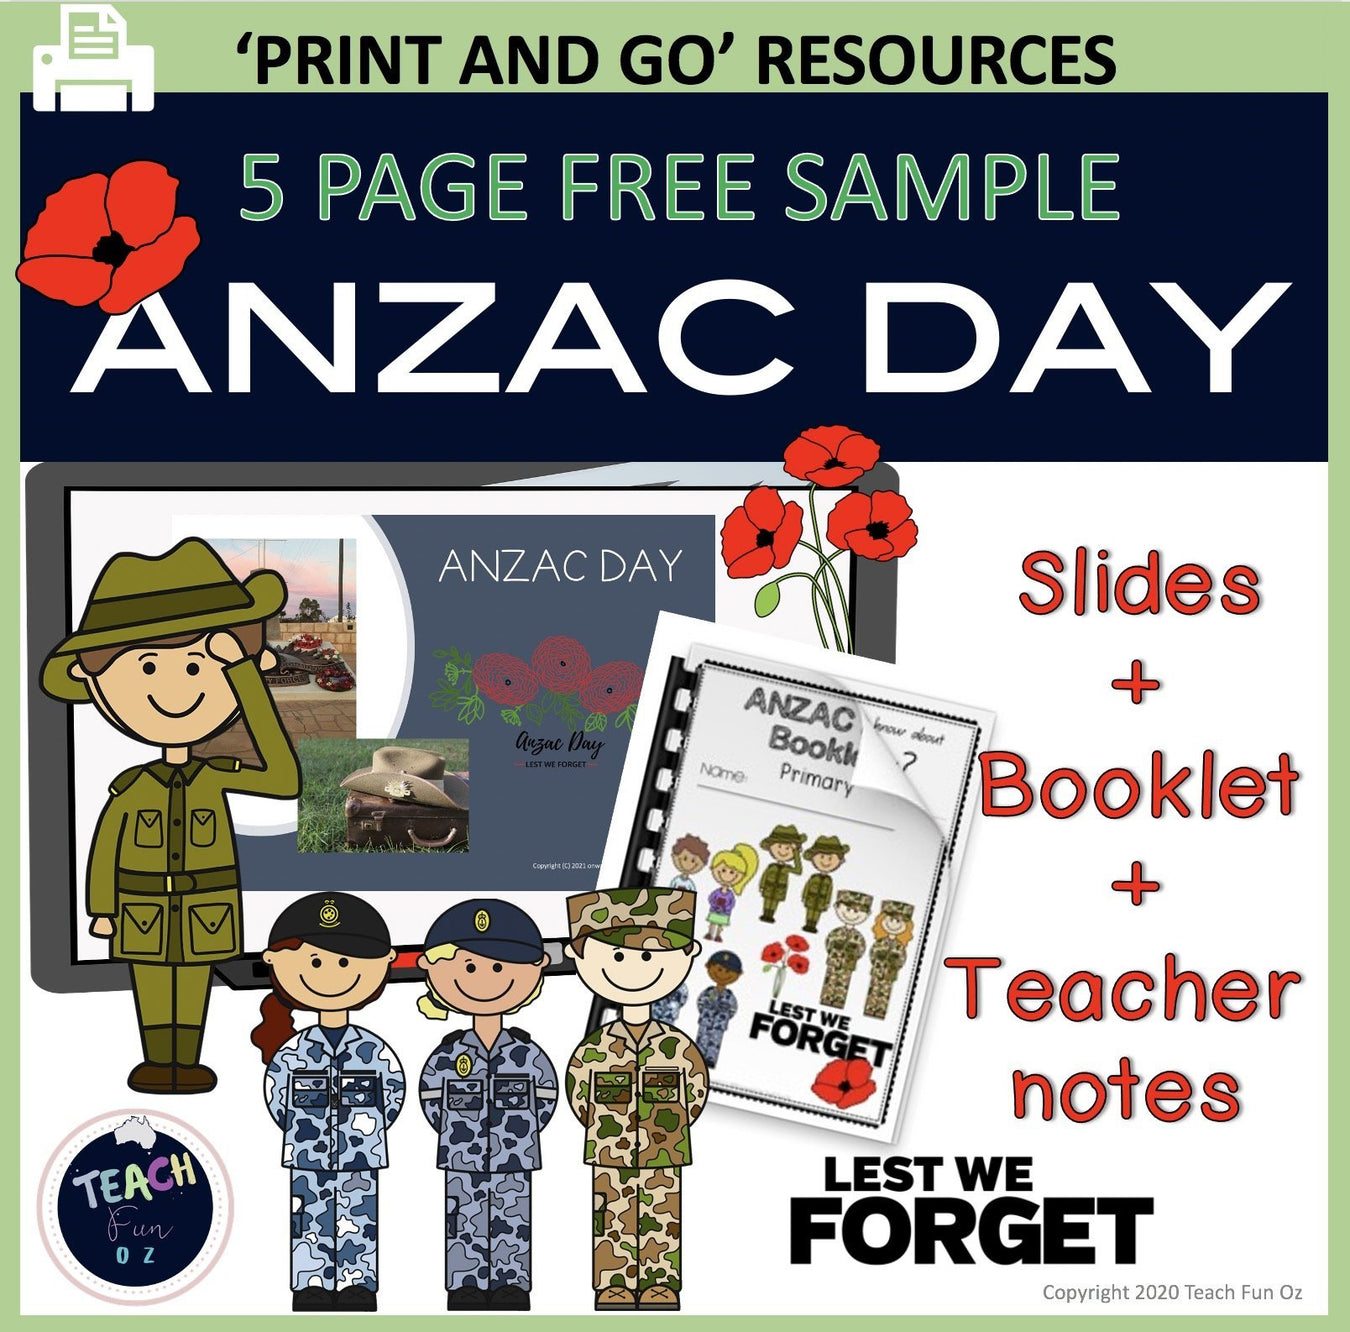 Anzac Day and Remembrance Day